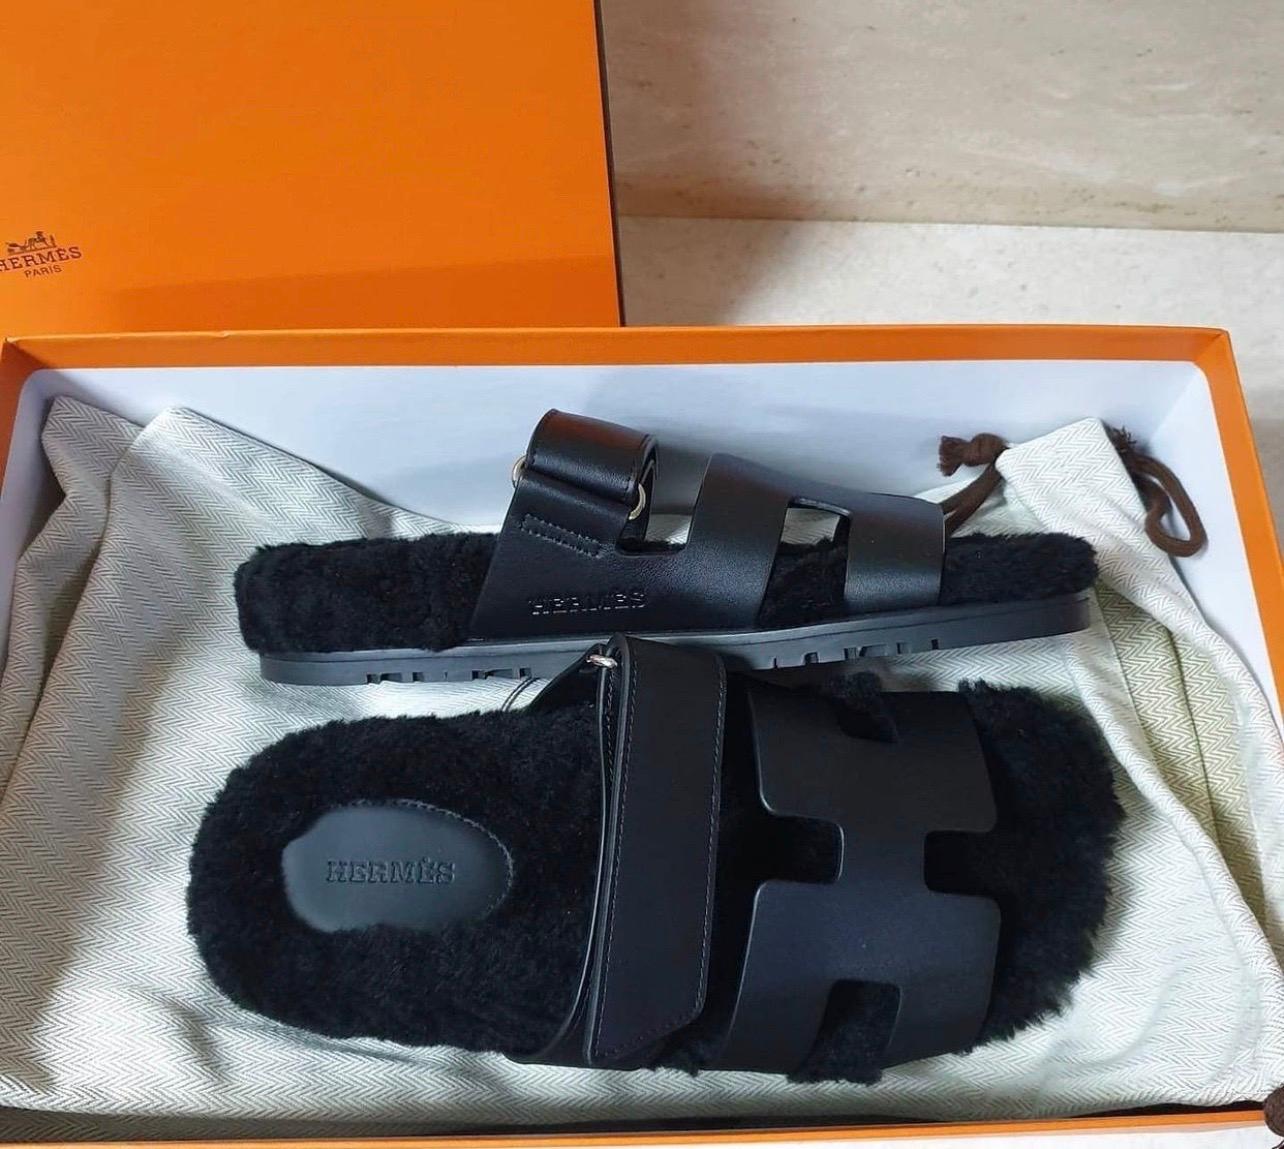 Hermès Chypre sandals in smooth black leather and woolskin - sold out worldwide. 
New, never worn.
Comes with dustbags.
Sz.37
For buyers from EU we can provide shipping from Poland. Please demand if you need.